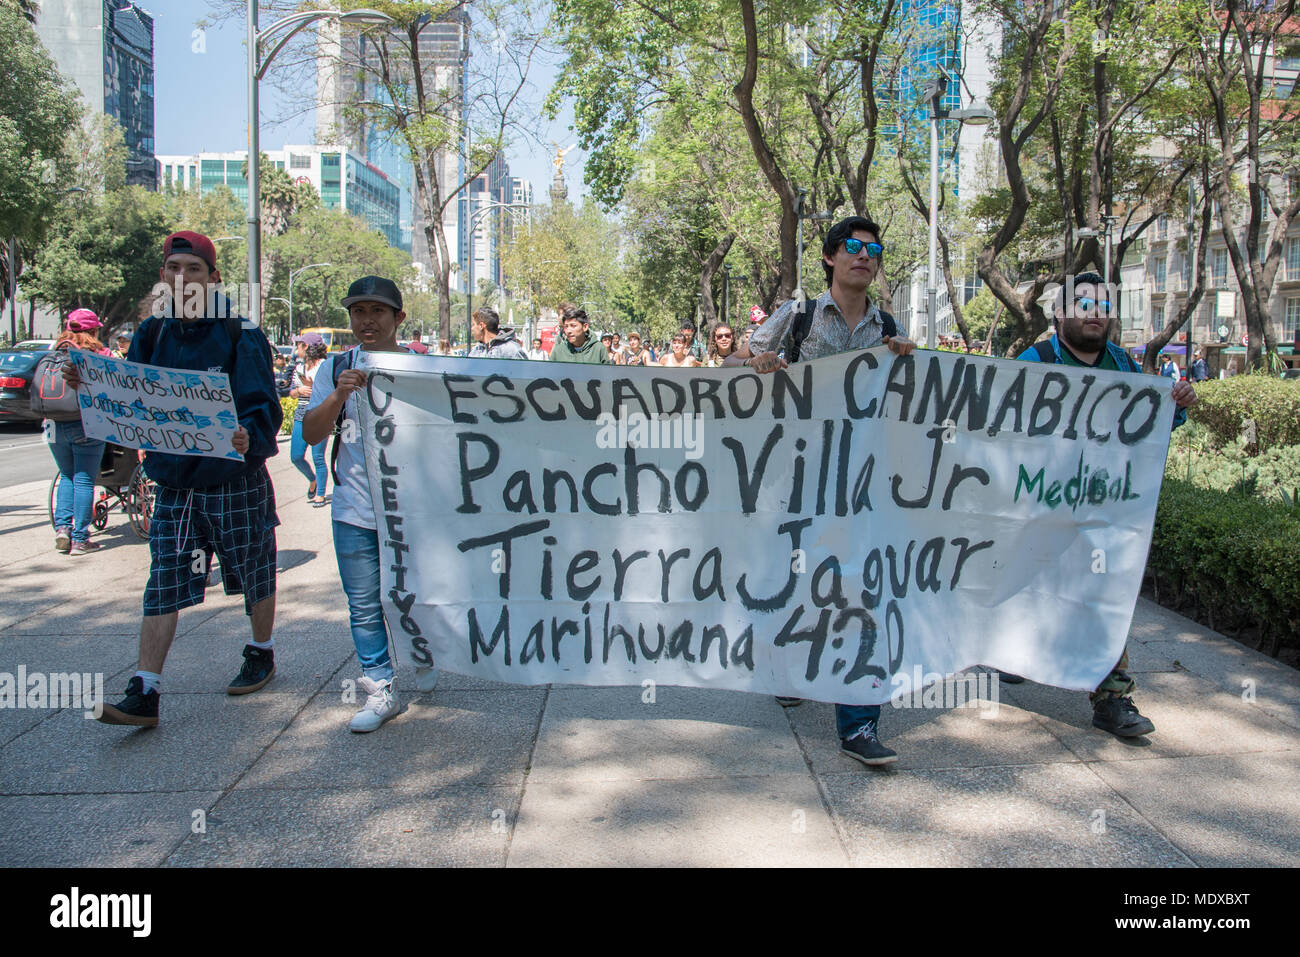 Mexico City, Mexico. 20th April, 2018.  More than a hundred people gathered in Mexico City's main avenue Paseo de la Reforma to rally in favor of the legalization of marijuana in Mexico City. The main banner reads 'Cannabic Squad Pancho Villa Jr.' The banner on the left reads 'United stoners will never be busted'. Credit: Miguel A. Aguilar-Mancera/Alamy Live News Stock Photo